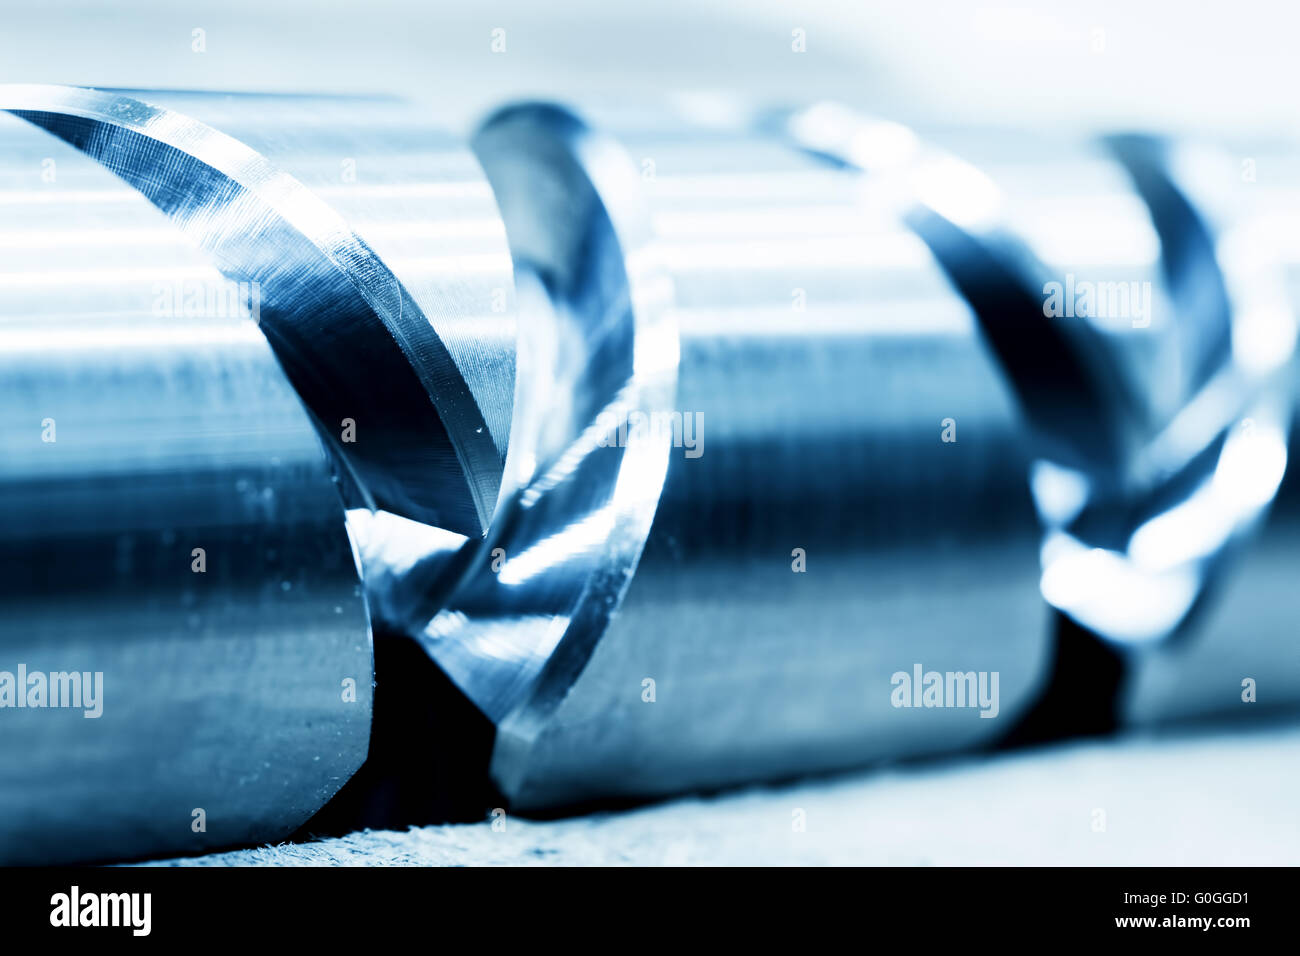 Heavy industrial element, screw. Industry, close-up Stock Photo